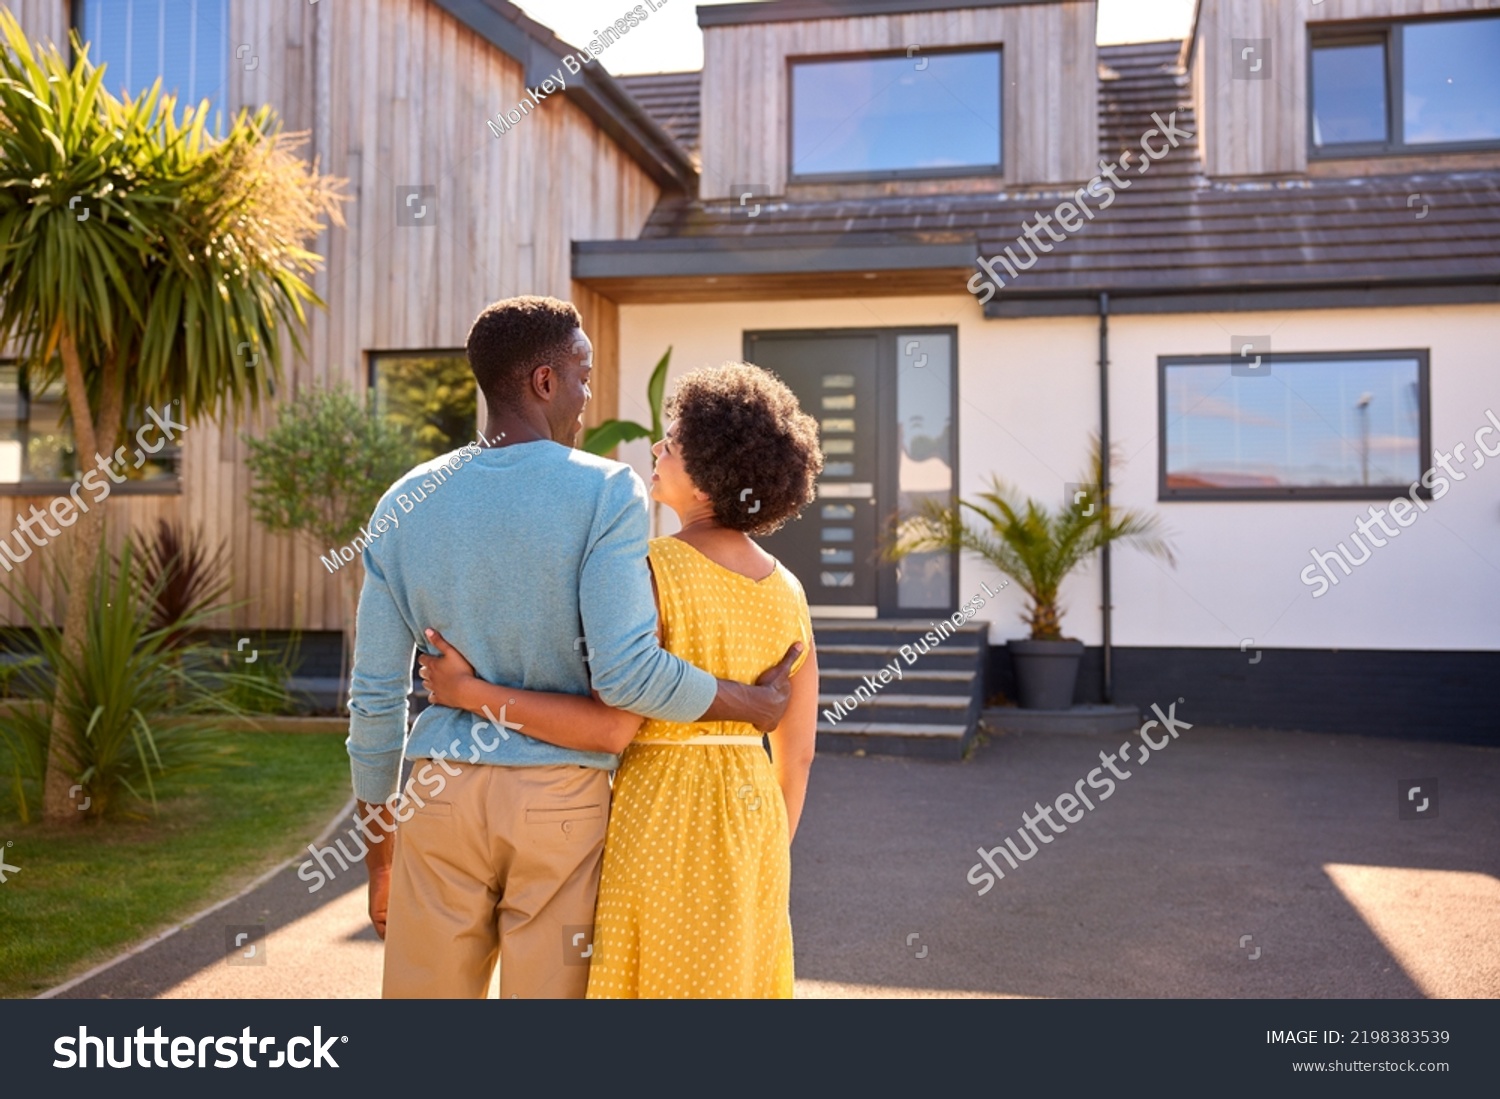 Rear View Of Couple Standing In Driveway In Front Of Dream Home Together #2198383539